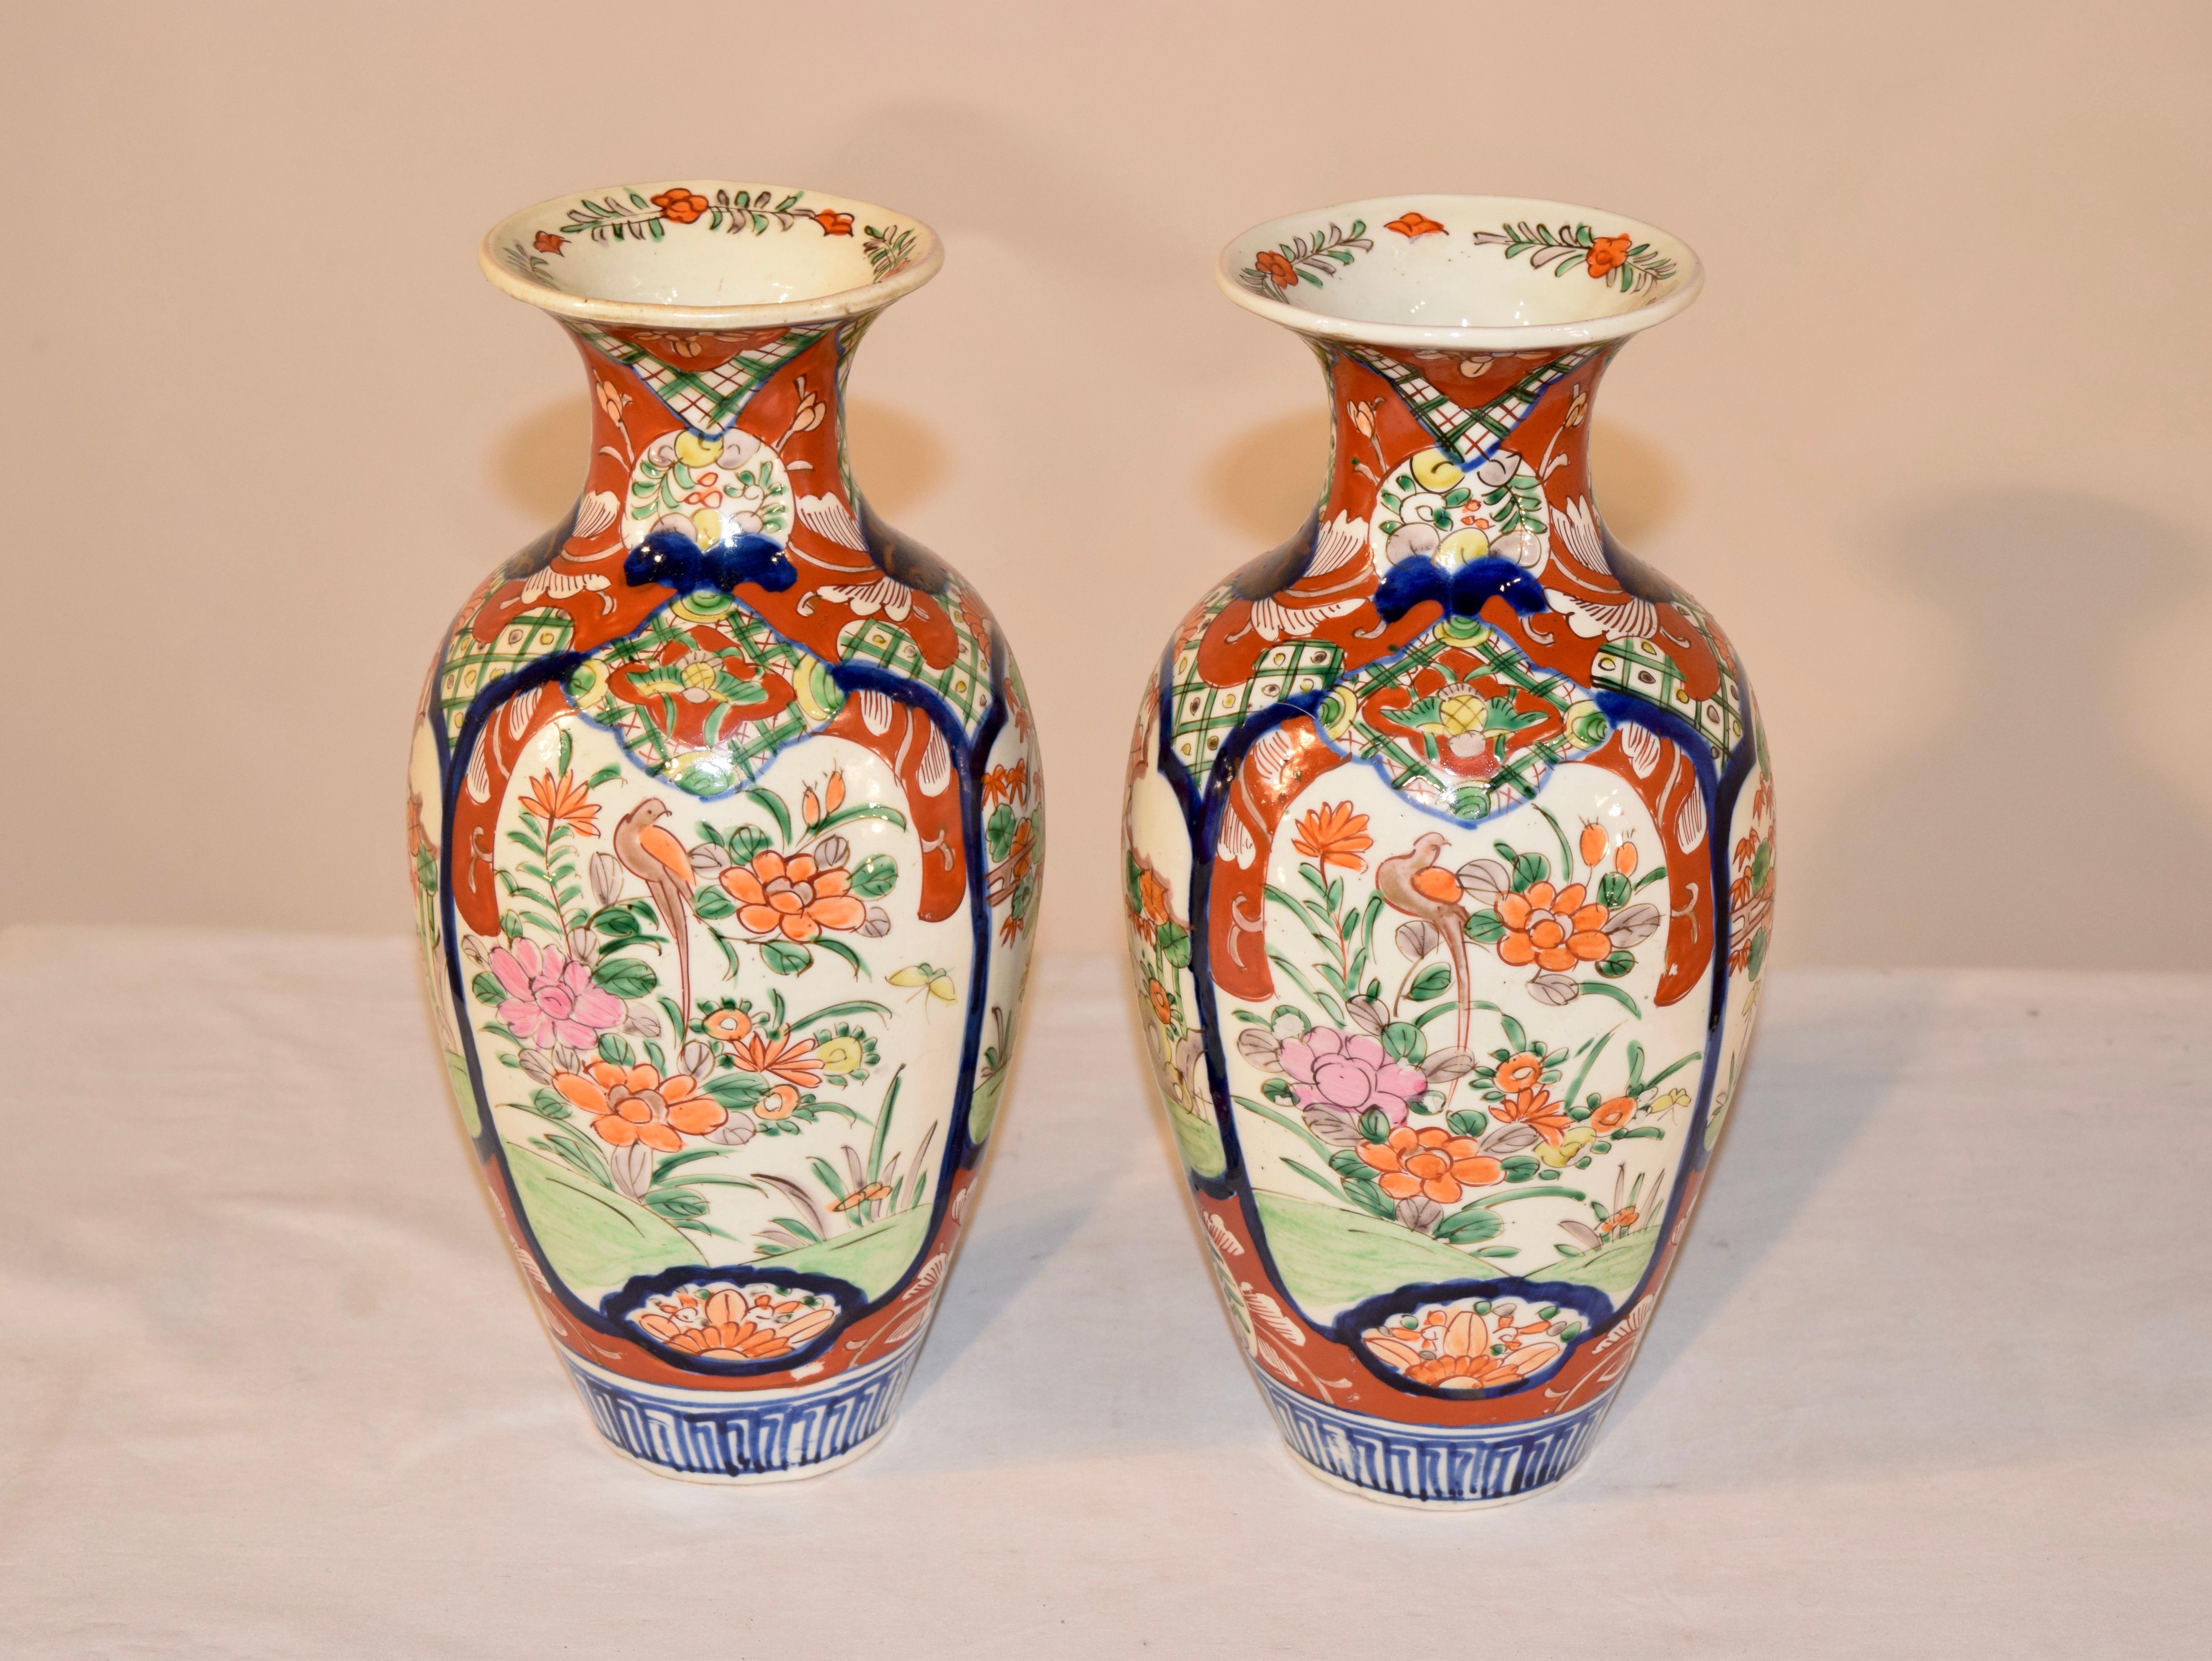 Pair of 19th century Imari vases with flared collars and wonderfully bulbous shapes which taper at the bottom. They are hand painted and have large medallions on the front and back, both with depictions of birds on branches with florals. The larger